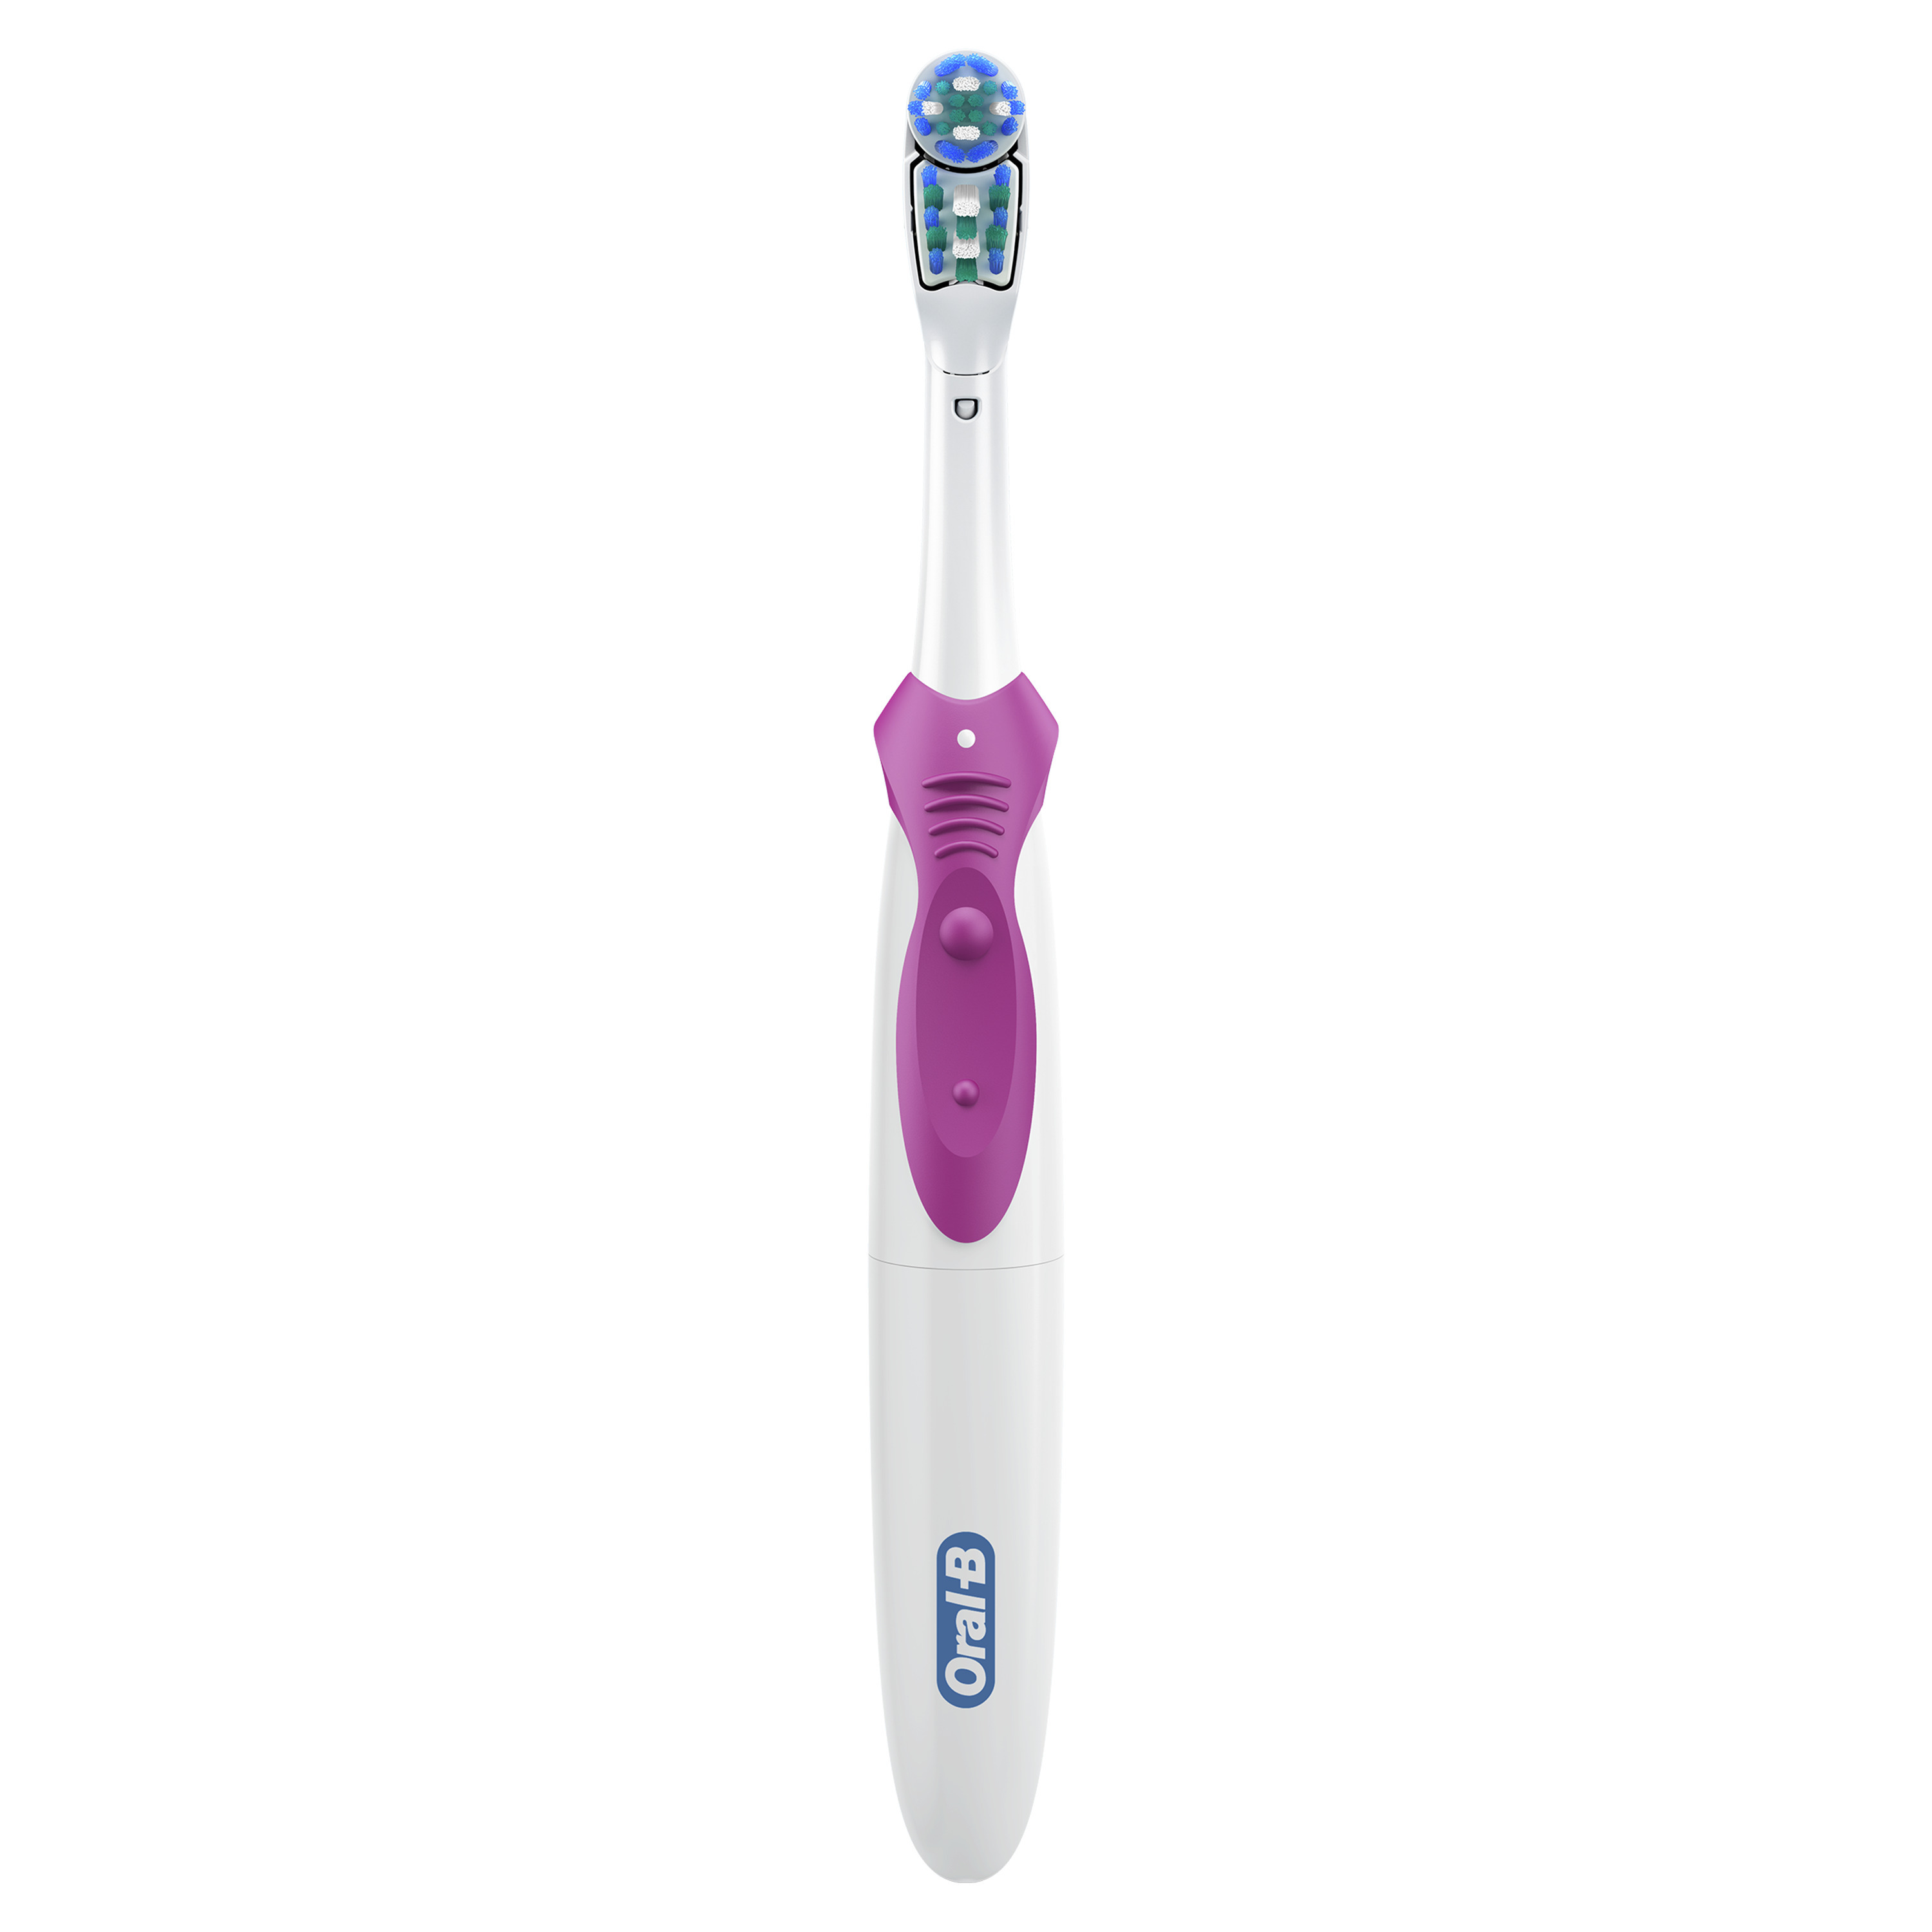 Oral-B Complete Battery Powered Toothbrush, 1 Count, Full Head, for Adults and Children 3+ - image 2 of 9